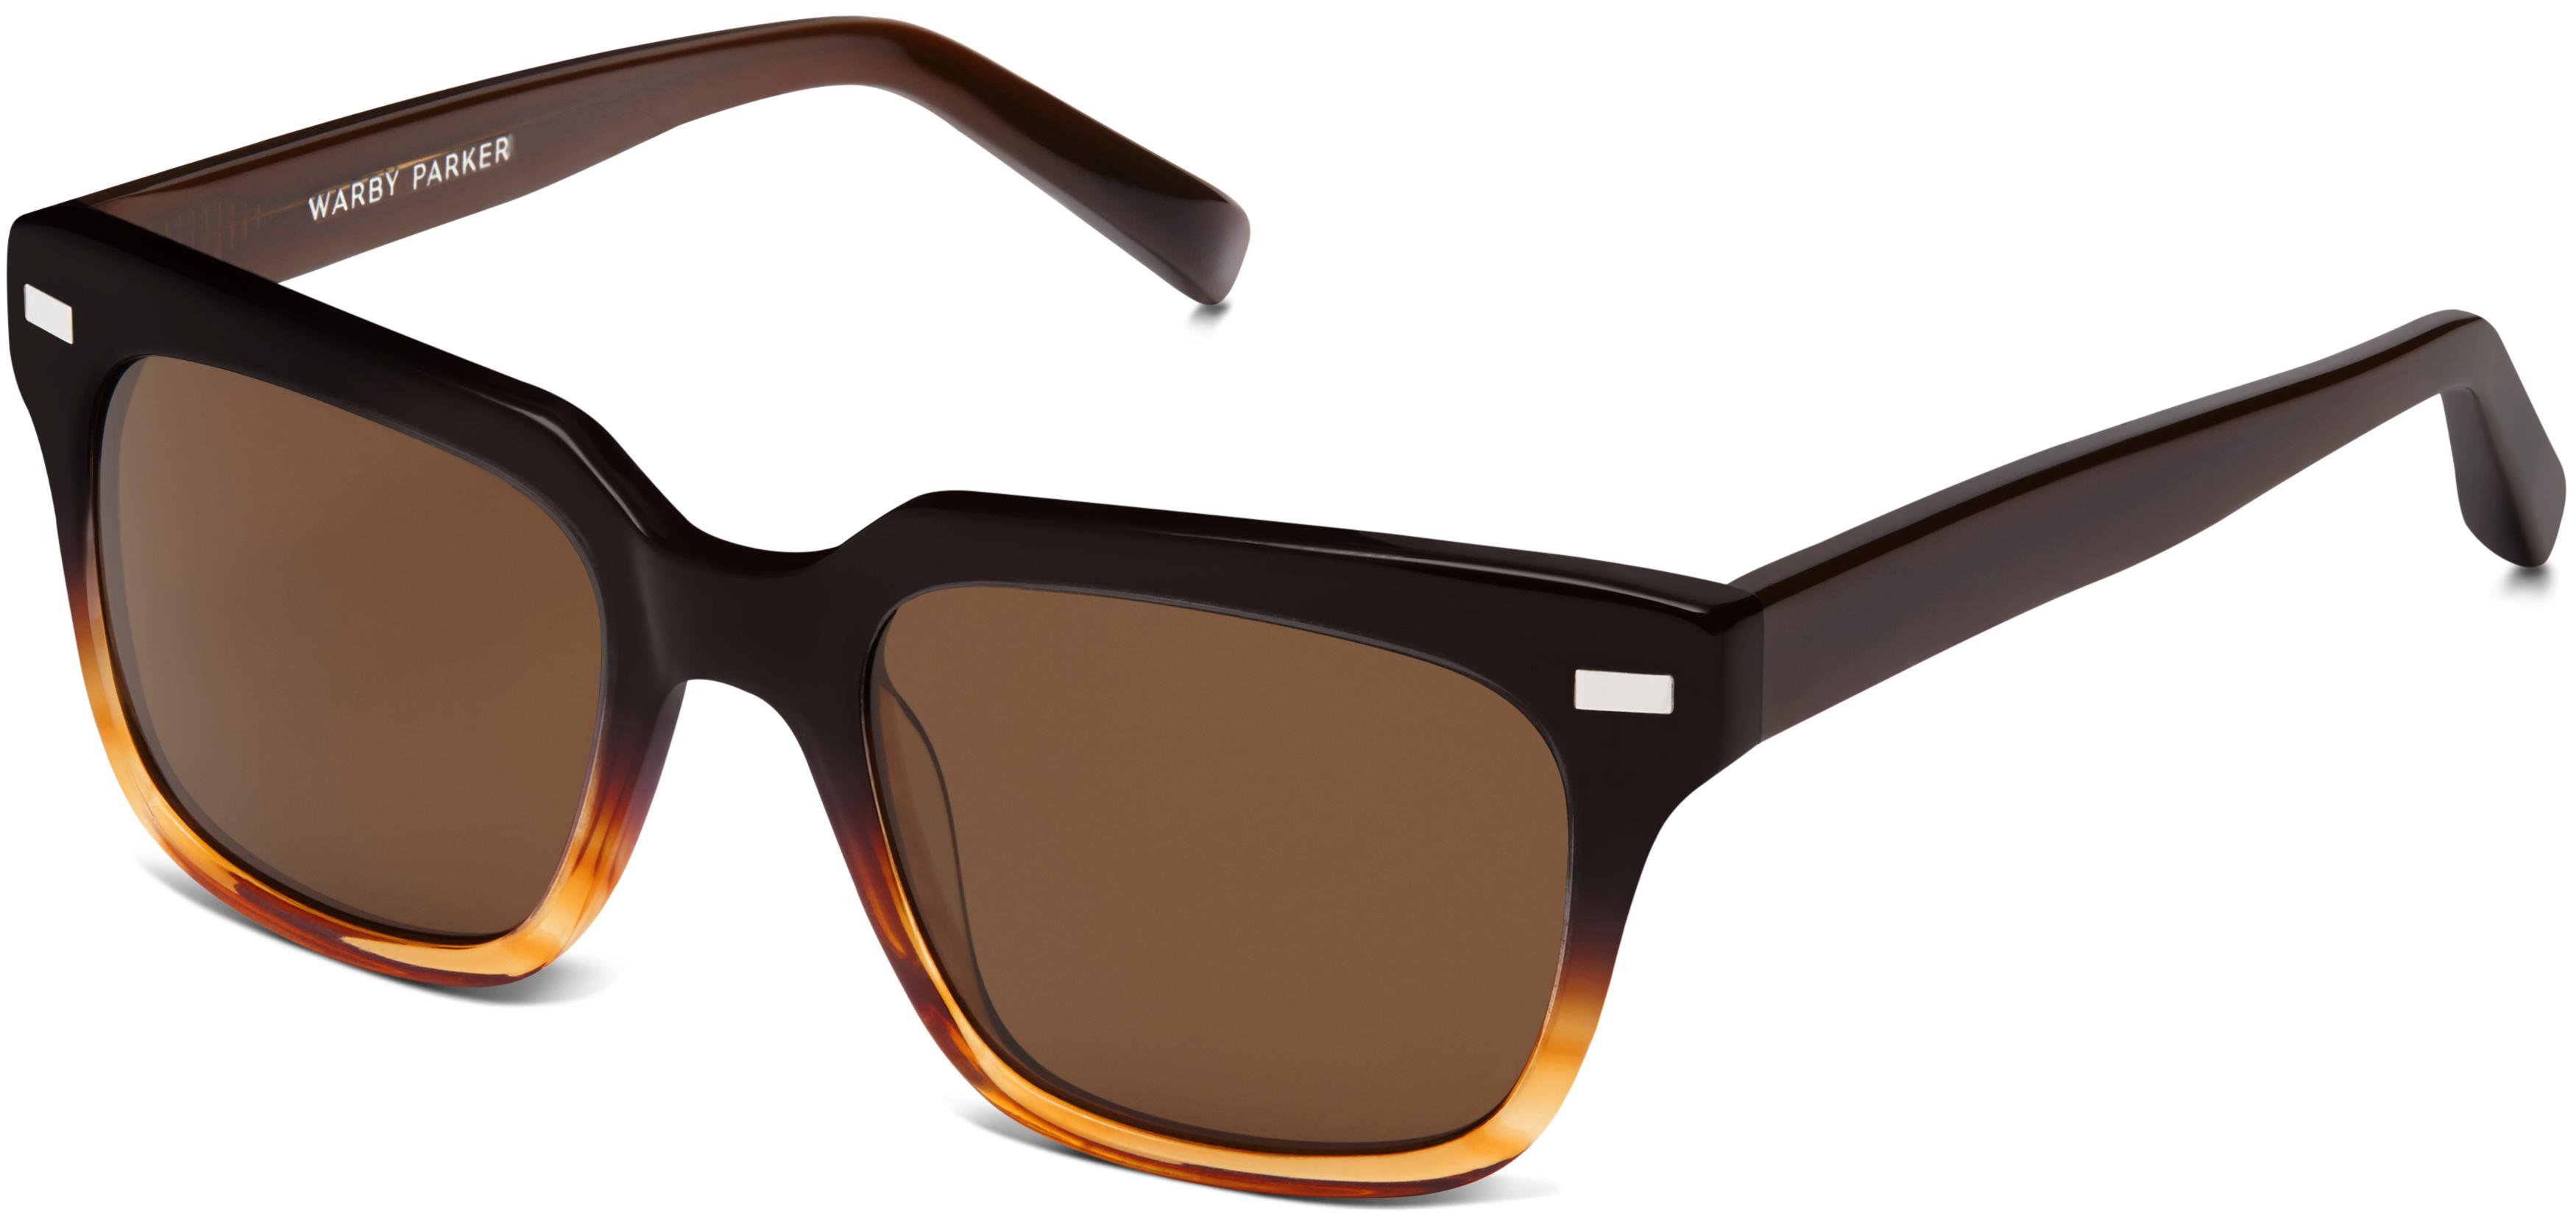 Winston Sunglasses in Old Fashioned Fade | Warby Parker